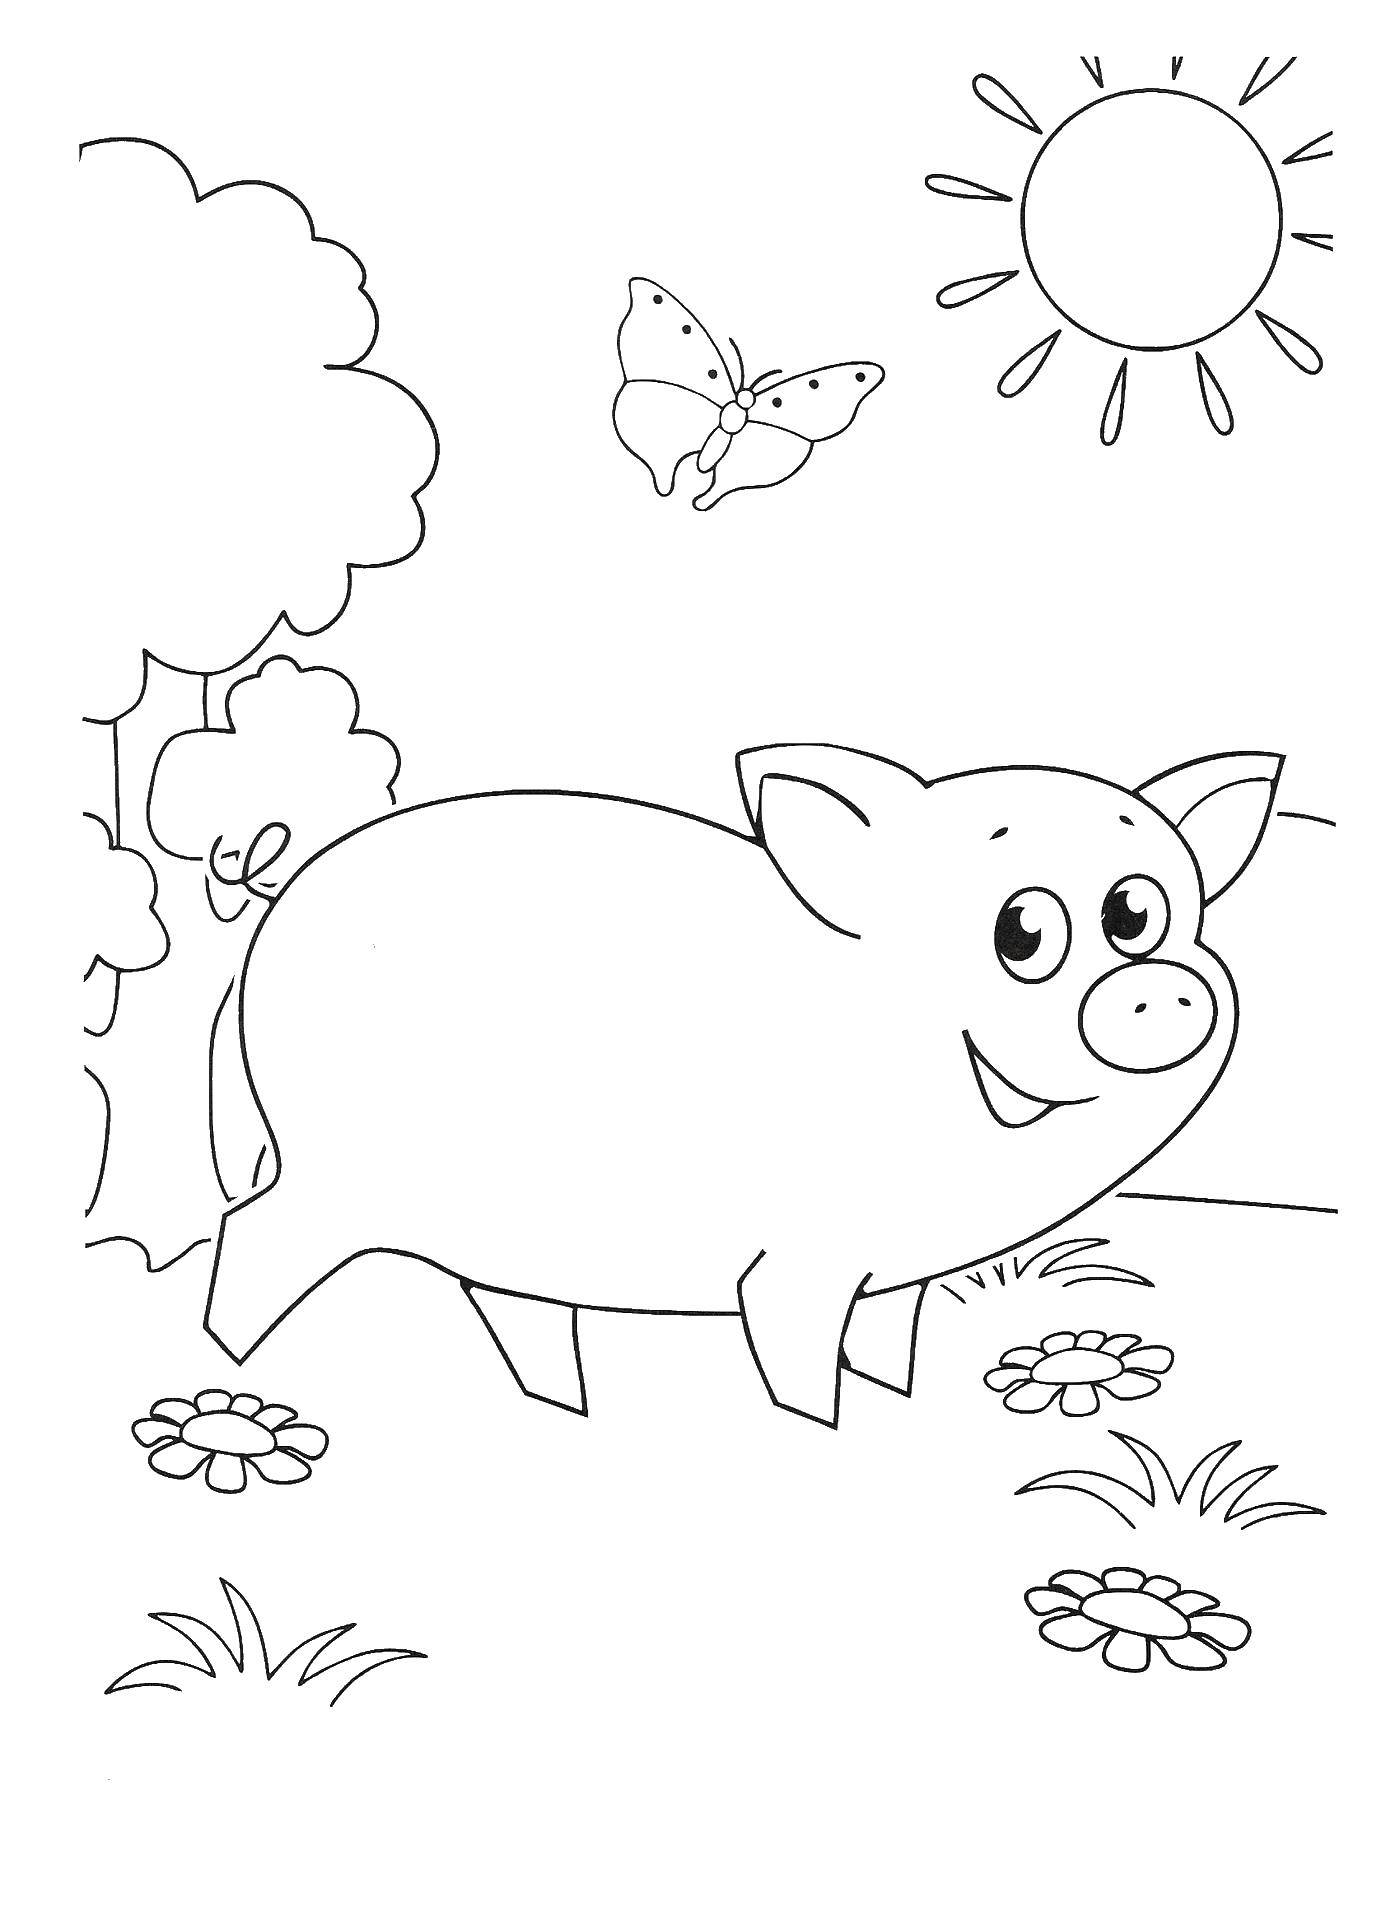 Coloring Pig. Category coloring, buttermilk. Tags:  Pig.